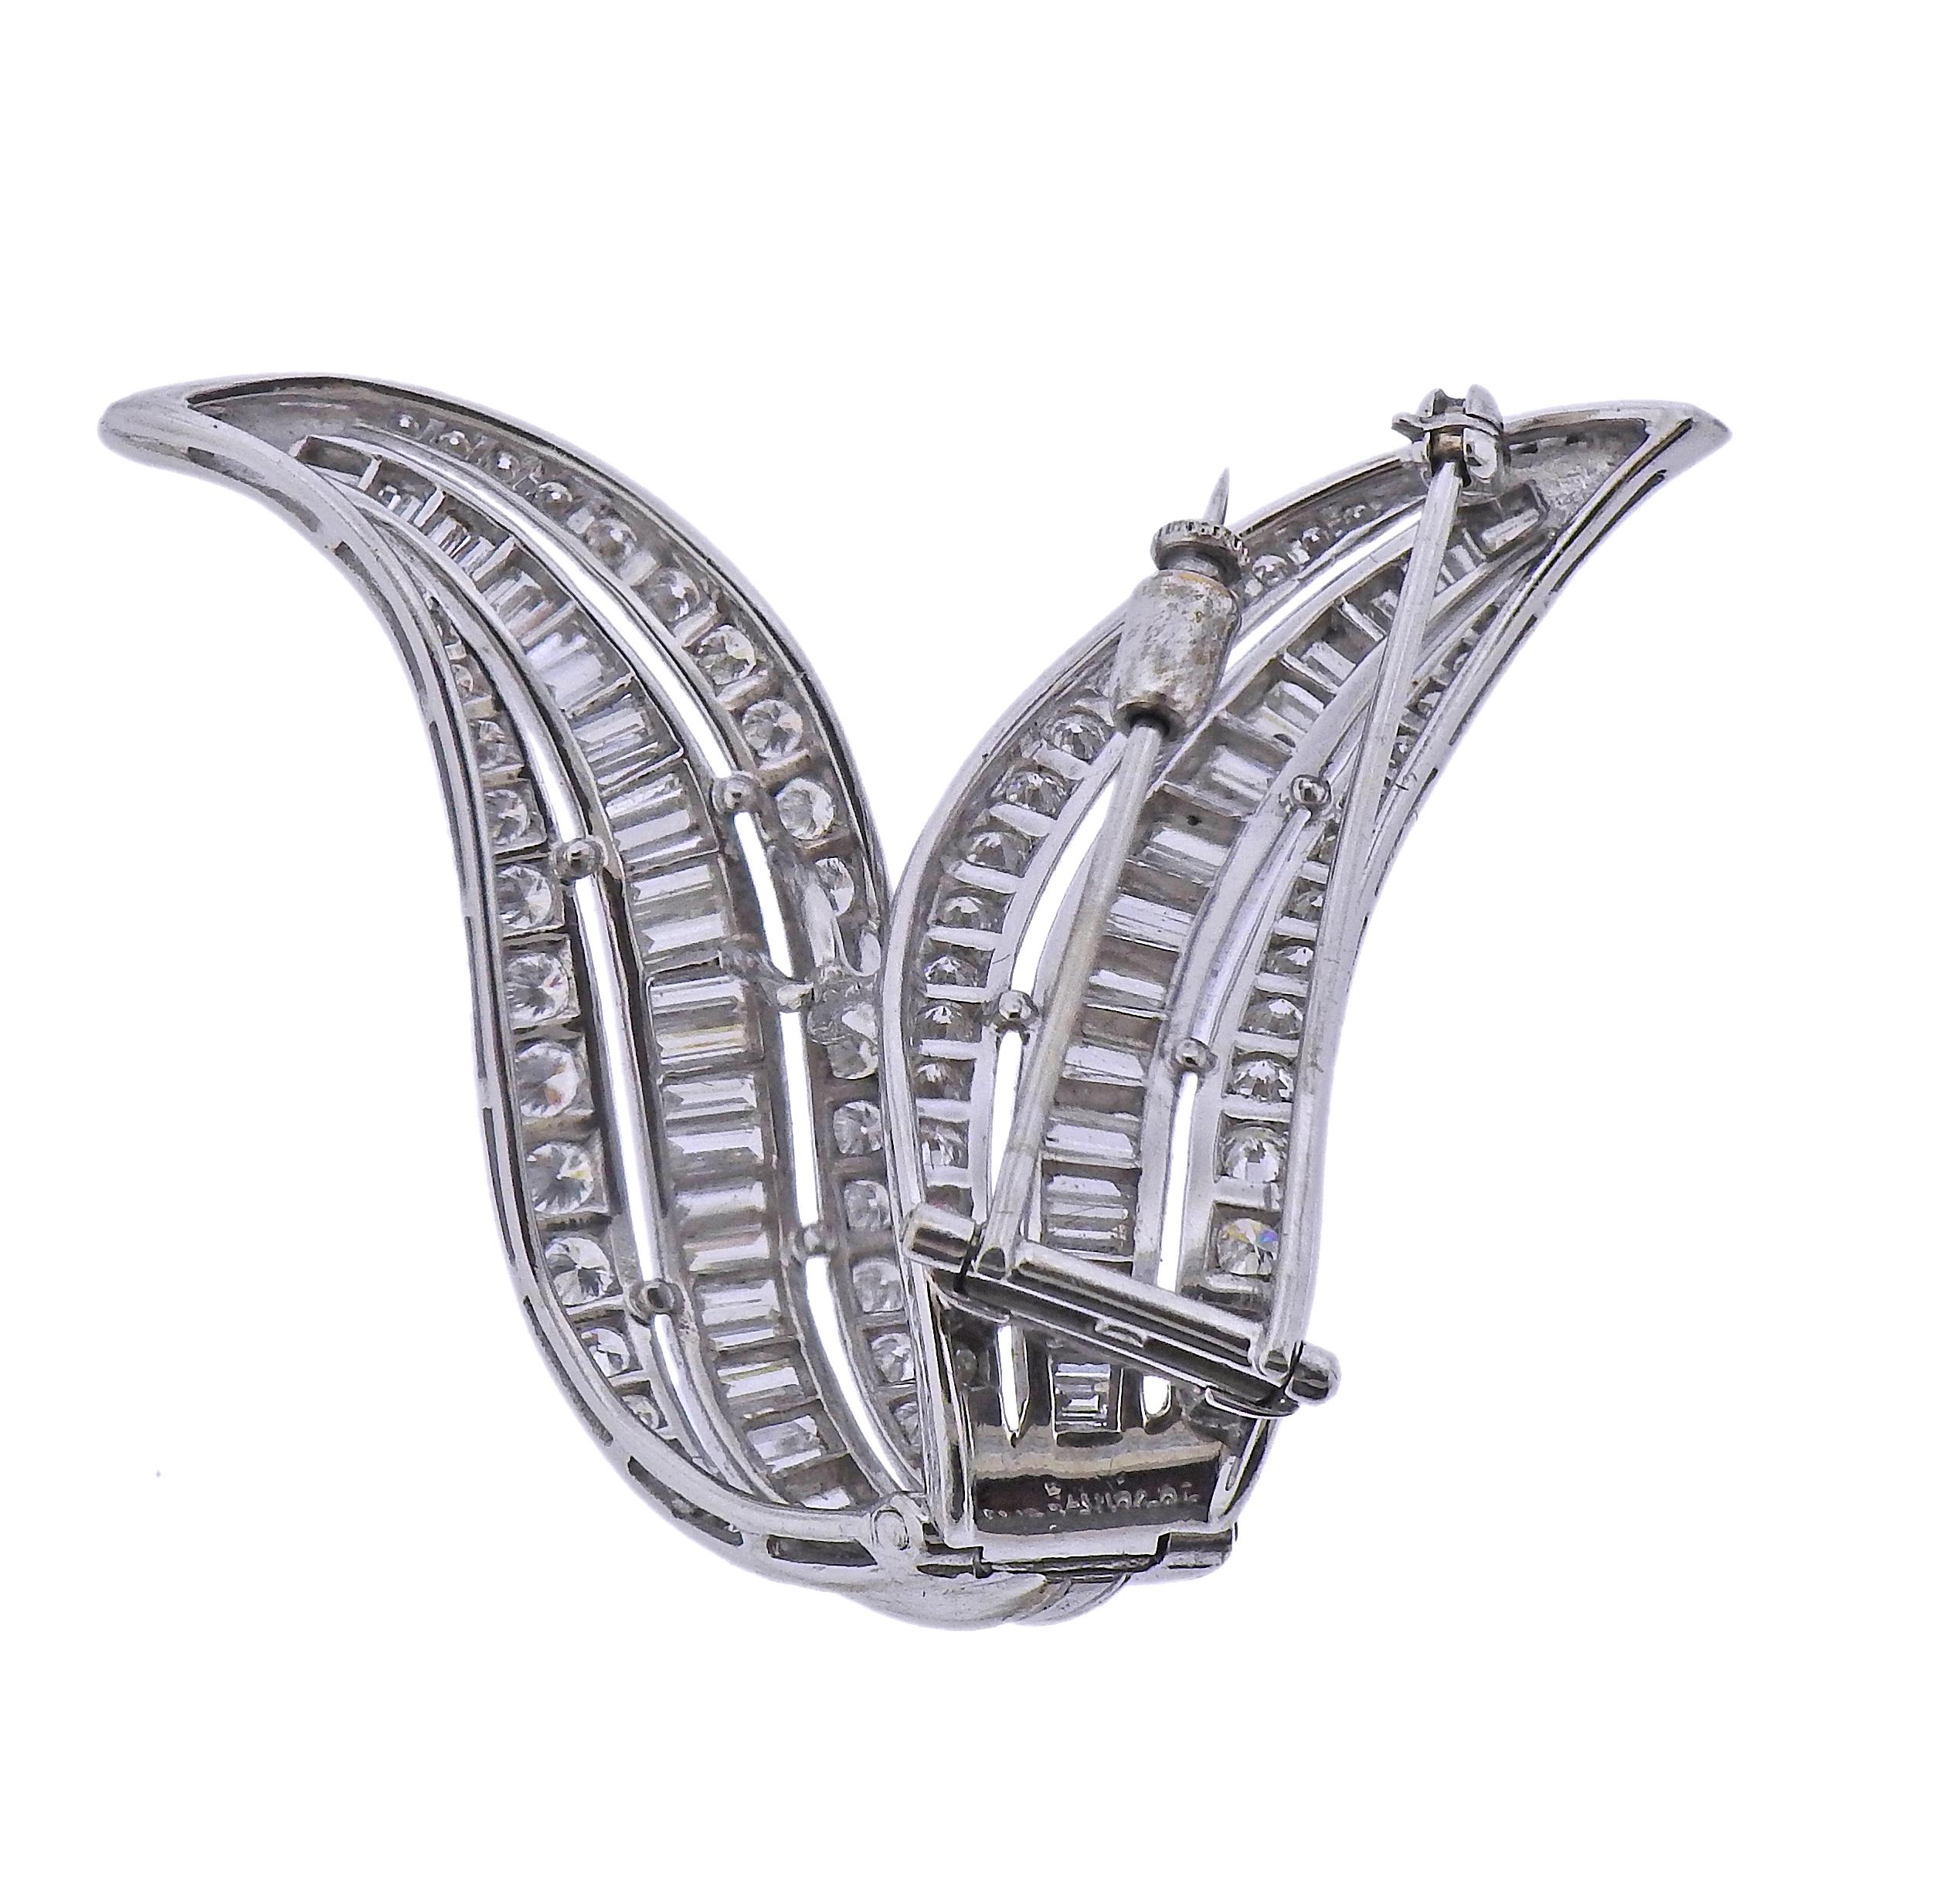 Platinum V shaped brooch, with round and baguette cut diamonds - approx. 6.00ctw in total. Brooch measures 1.75